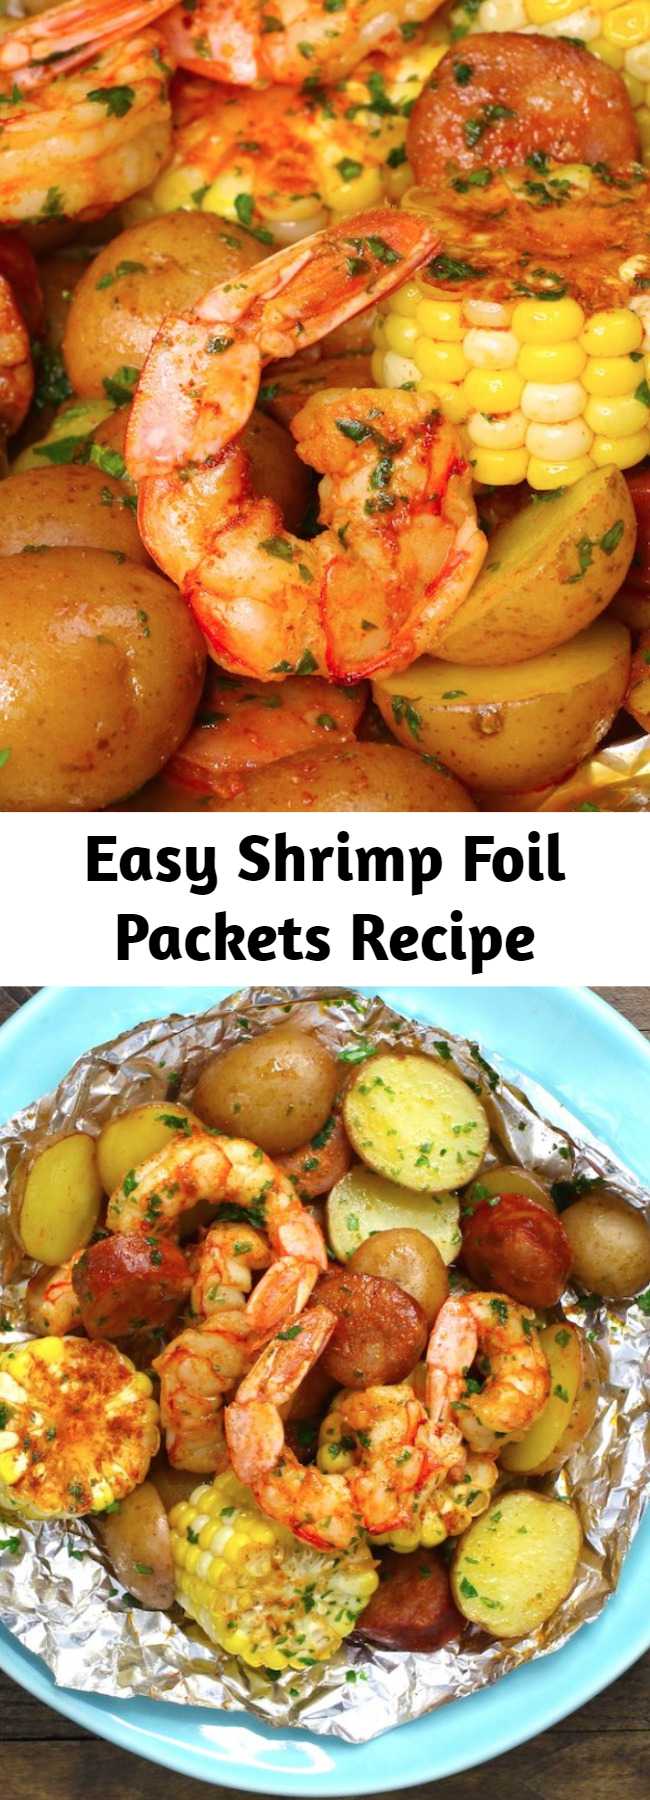 Easy Shrimp Foil Packets Recipe - These Shrimp Boil Foil Packs are full of juicy shrimp, sausage, corn and potatoes with Cajun seasoning and fresh lemon. You can grill them on the bbq or bake in the oven. These shrimp foil packets are an easy dinner that’s also fun to make for a party!